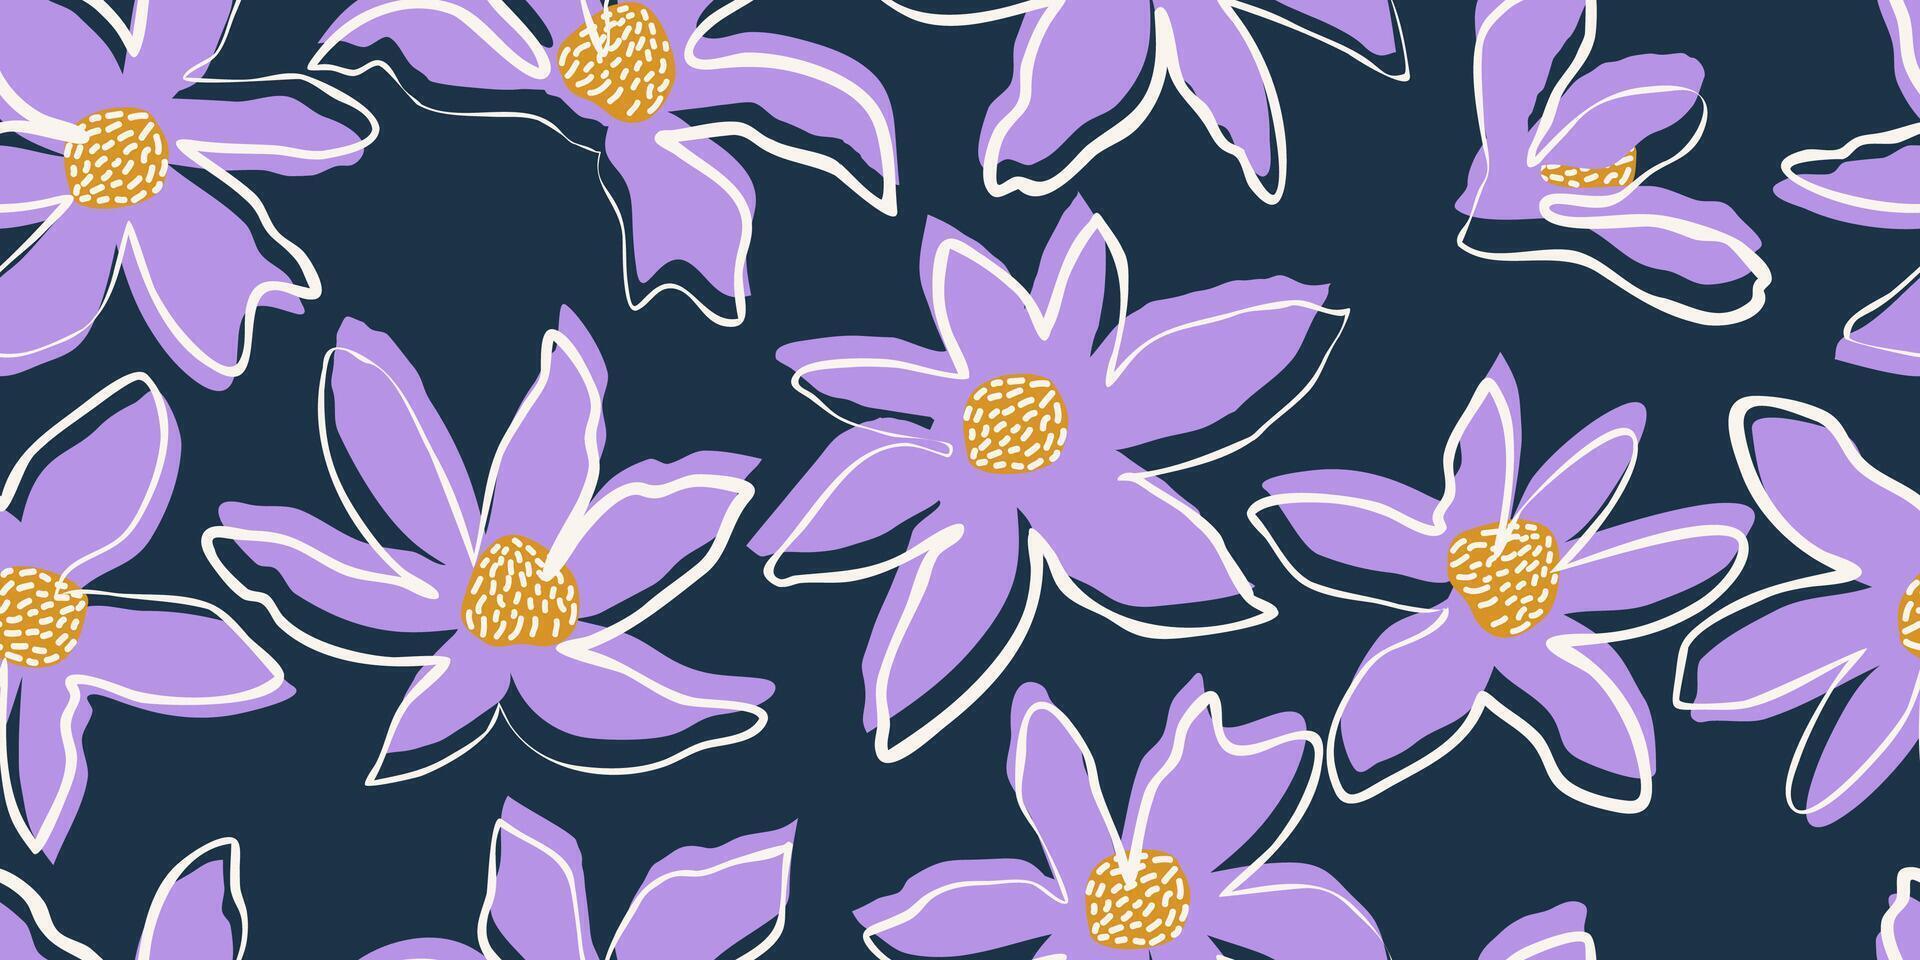 Exotic hand drawn flowers, seamless patterns with floral for fabric, textiles, clothing, wrapping paper, cover, banner, home decor, abstract backgrounds. vector